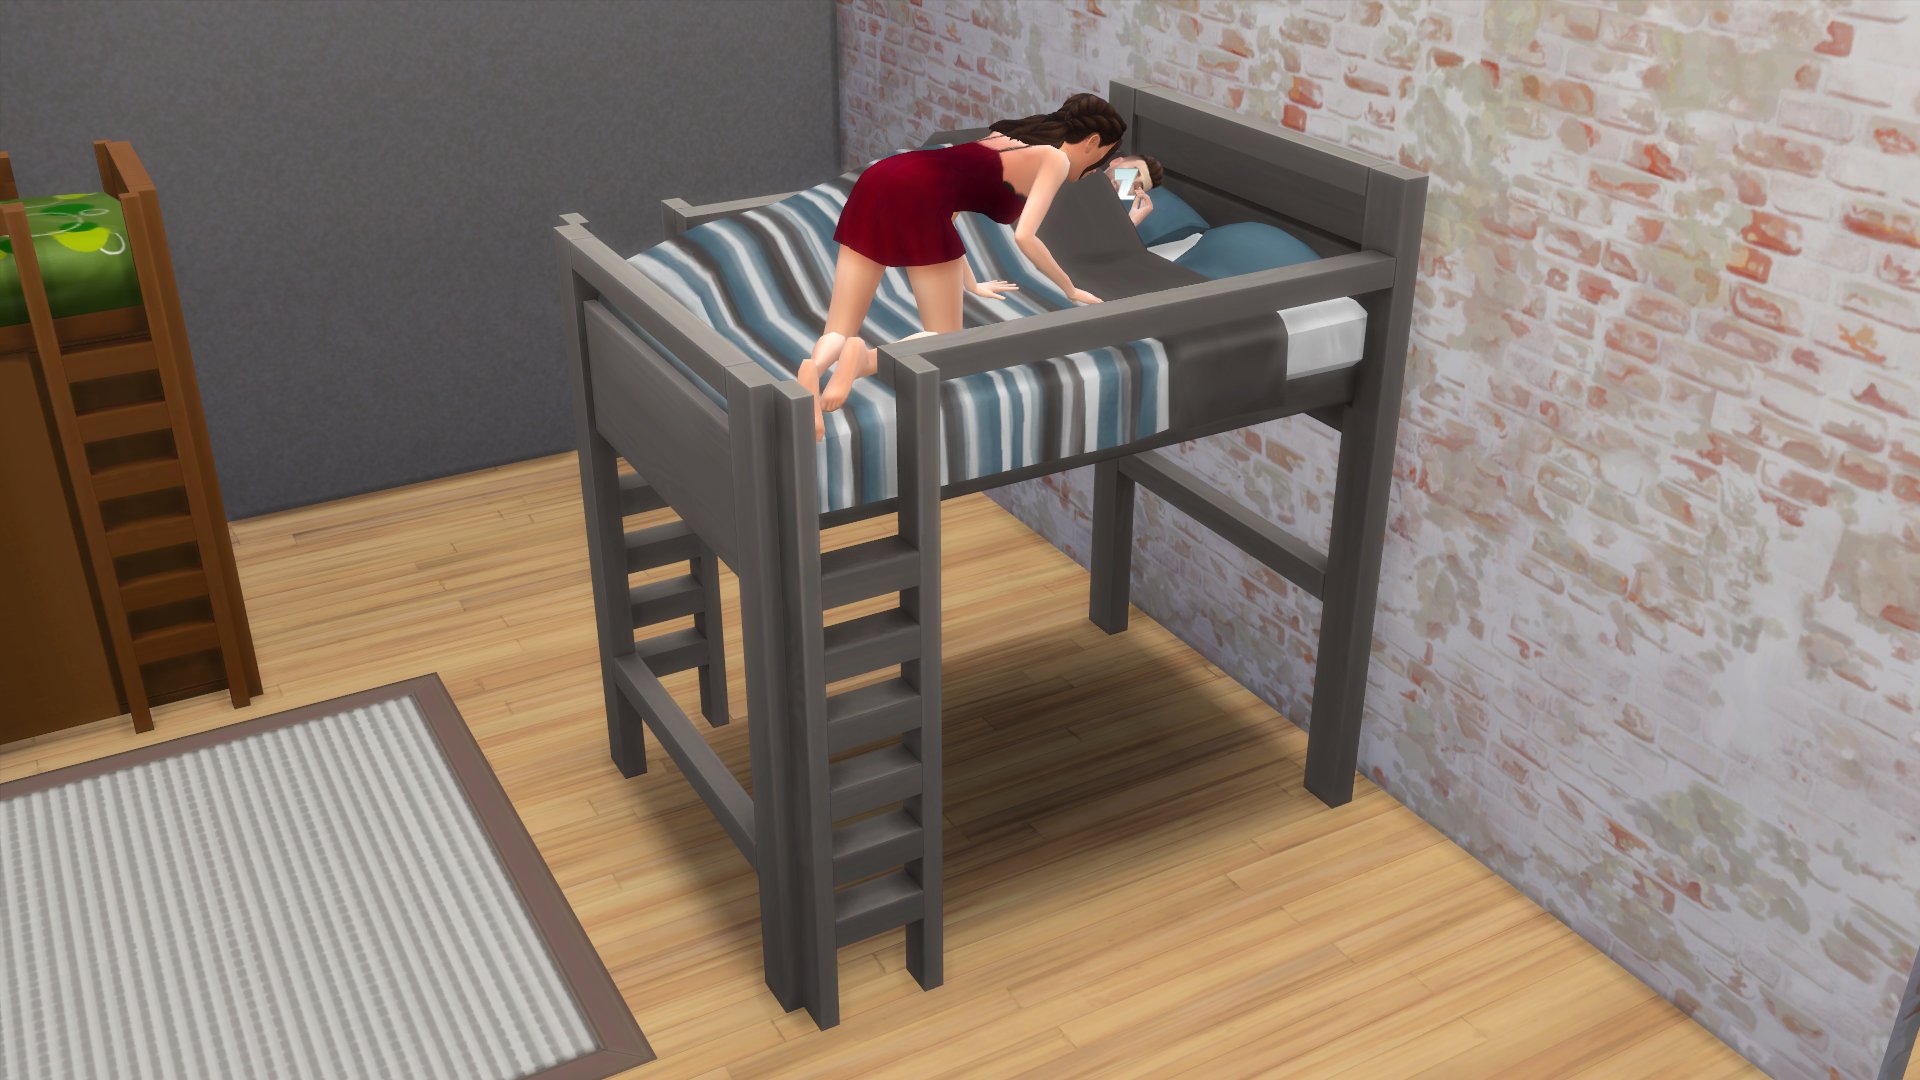 The Sims 4 Double Loft Beds Are Coming, Sims 4 Cc Bunk Beds